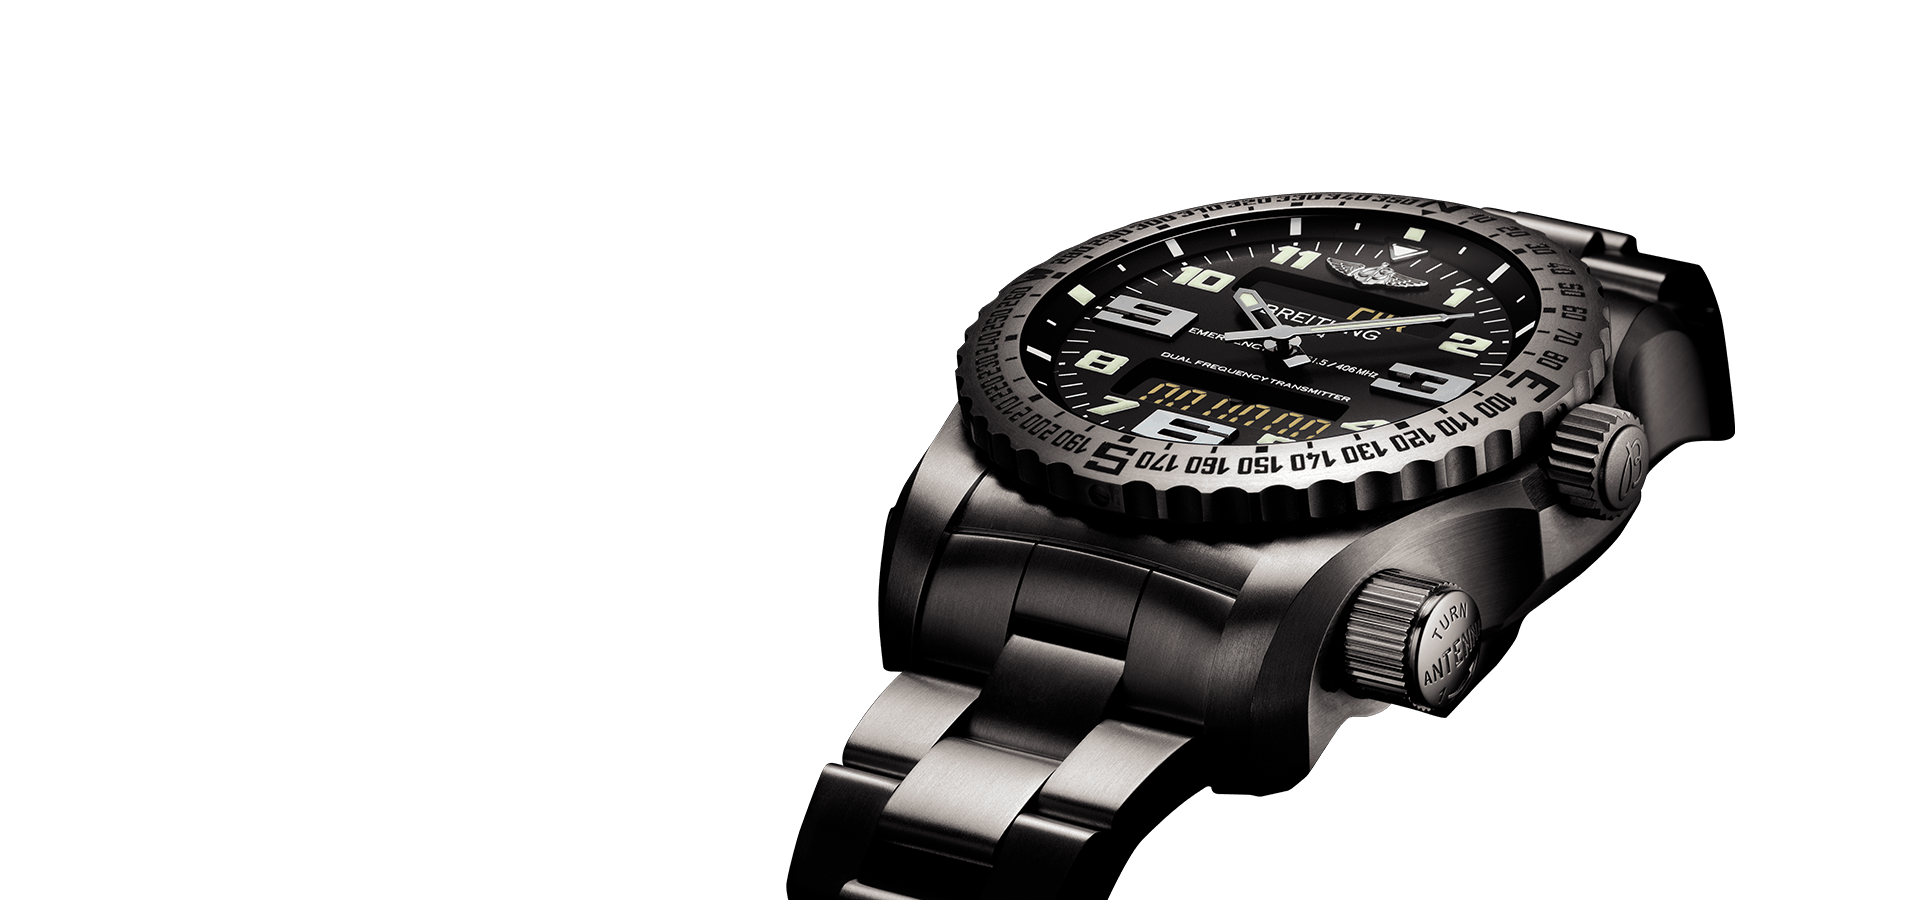 Breitling Avengers automatic 43 mmbreitling Super Ocean Heritage II Automatic Stainless Steel 46mm Box s Paper 2018